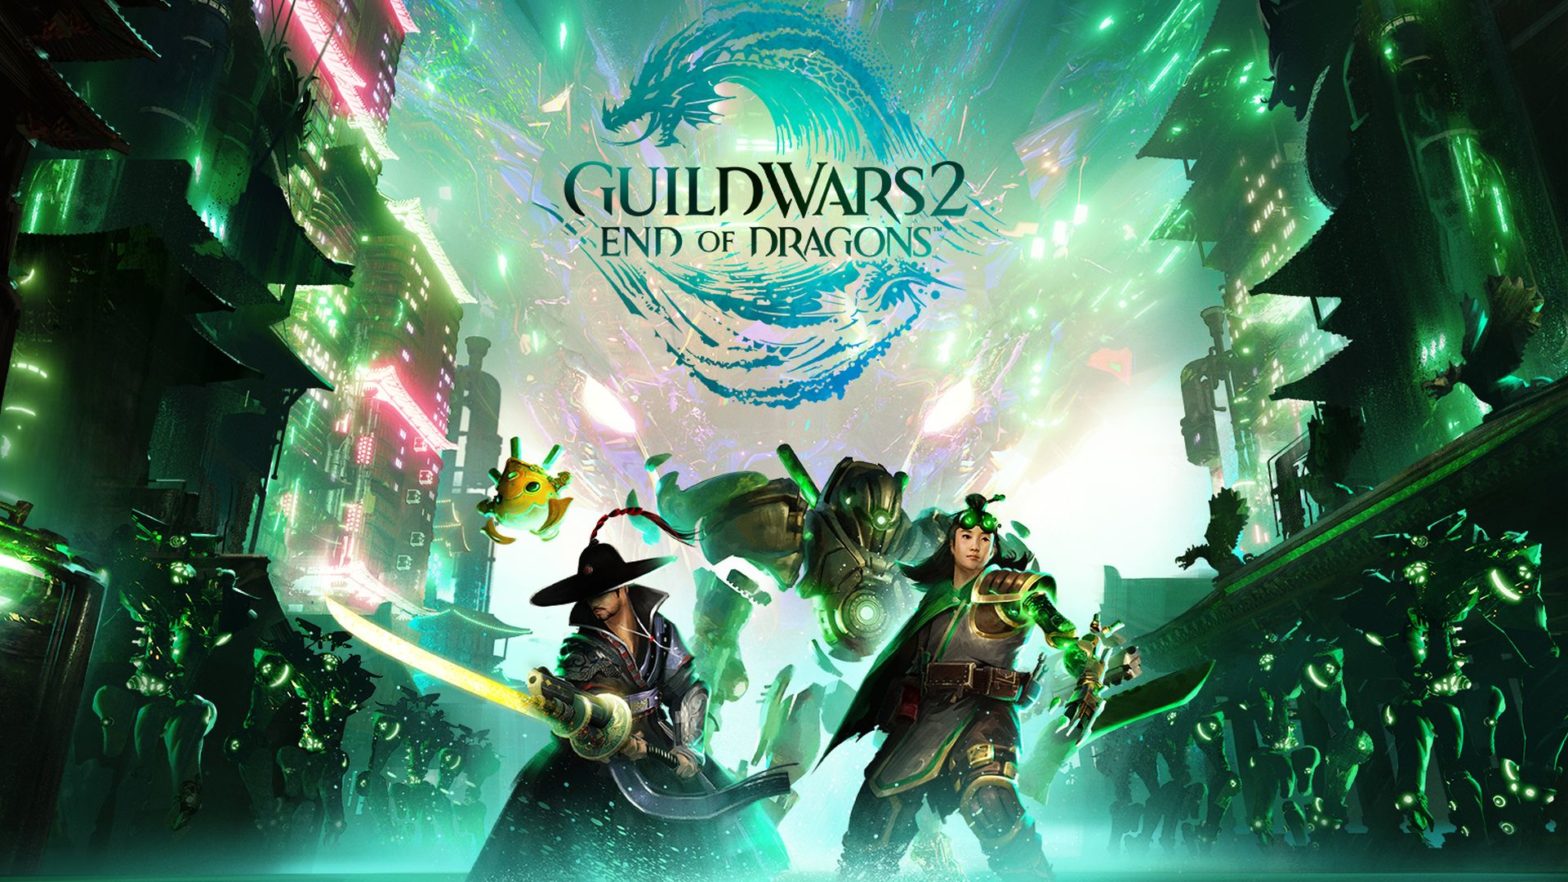 Guild Wars 2: End of Dragons’ release date has been unveiled